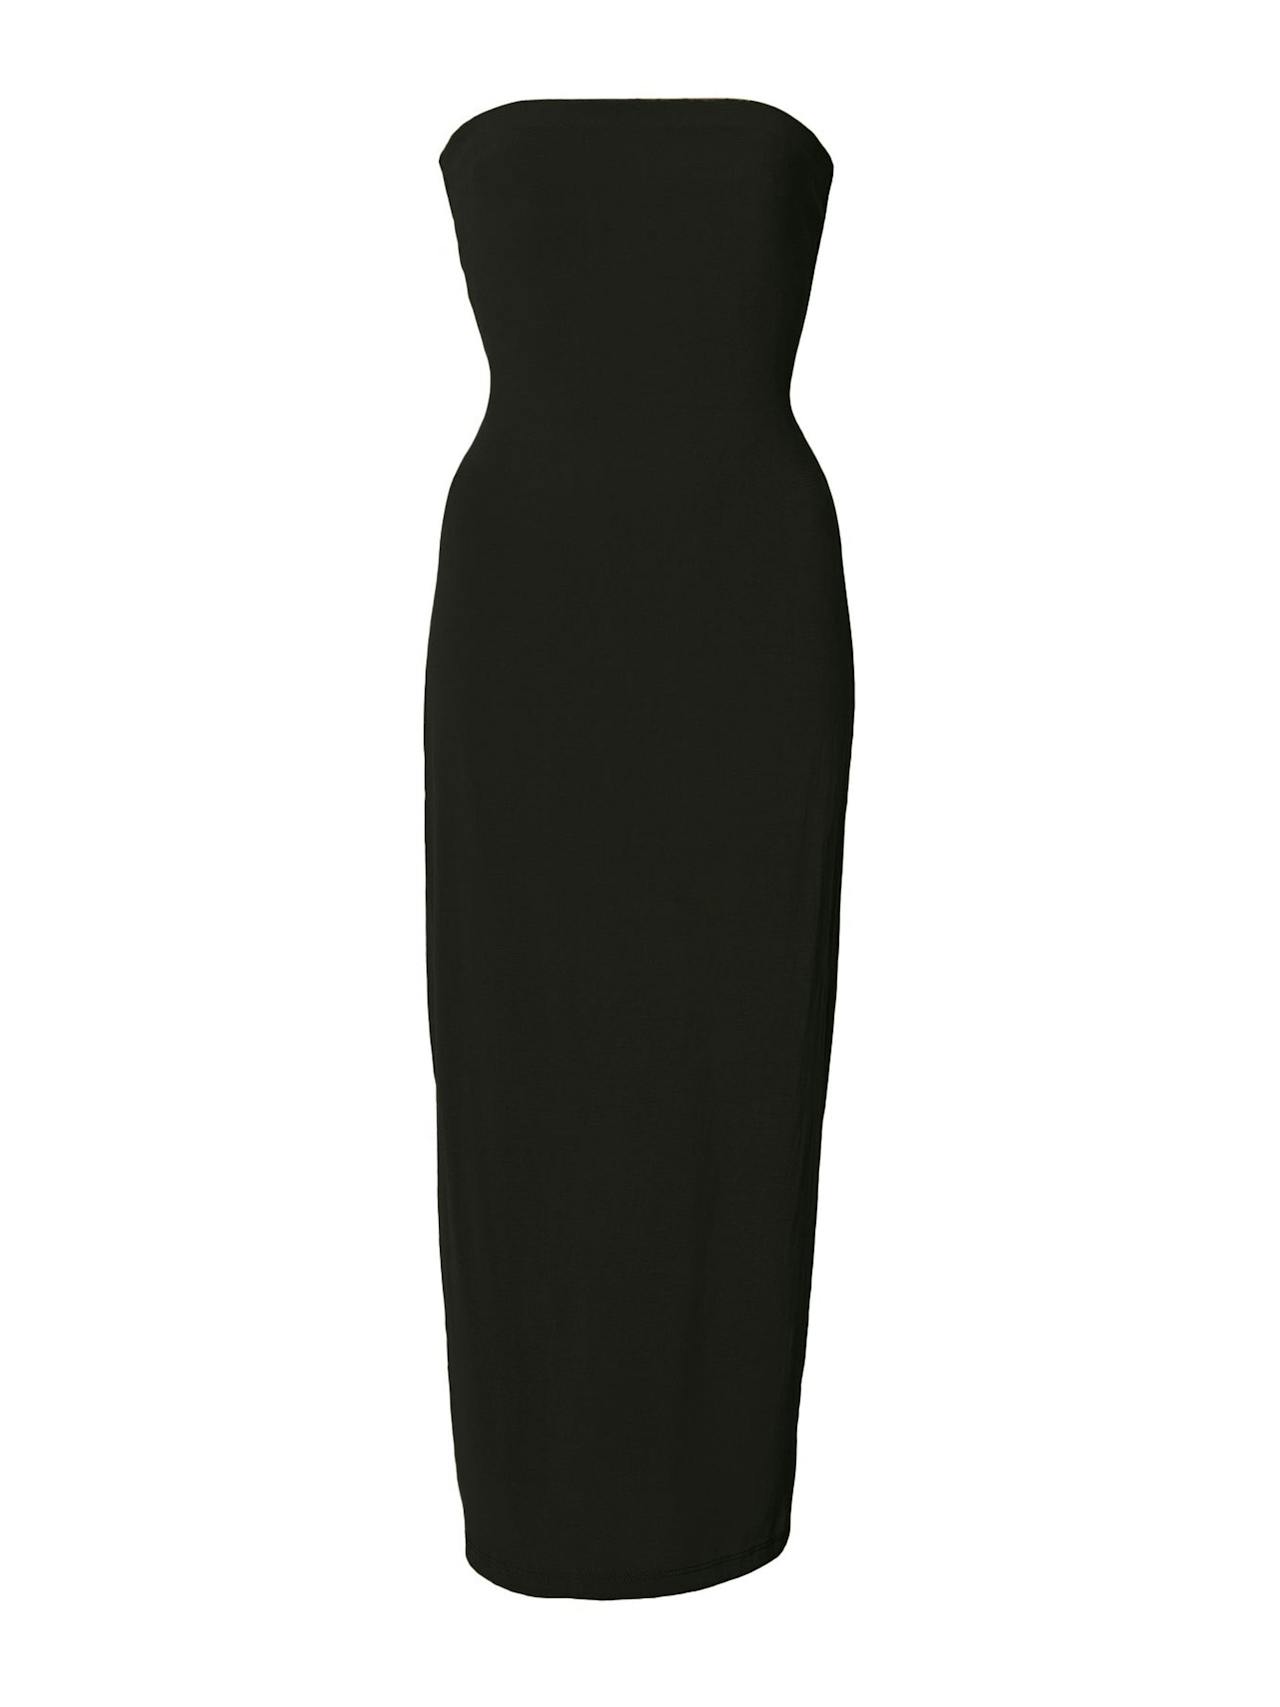 The Strapless Tie Back dress in stretch cupro